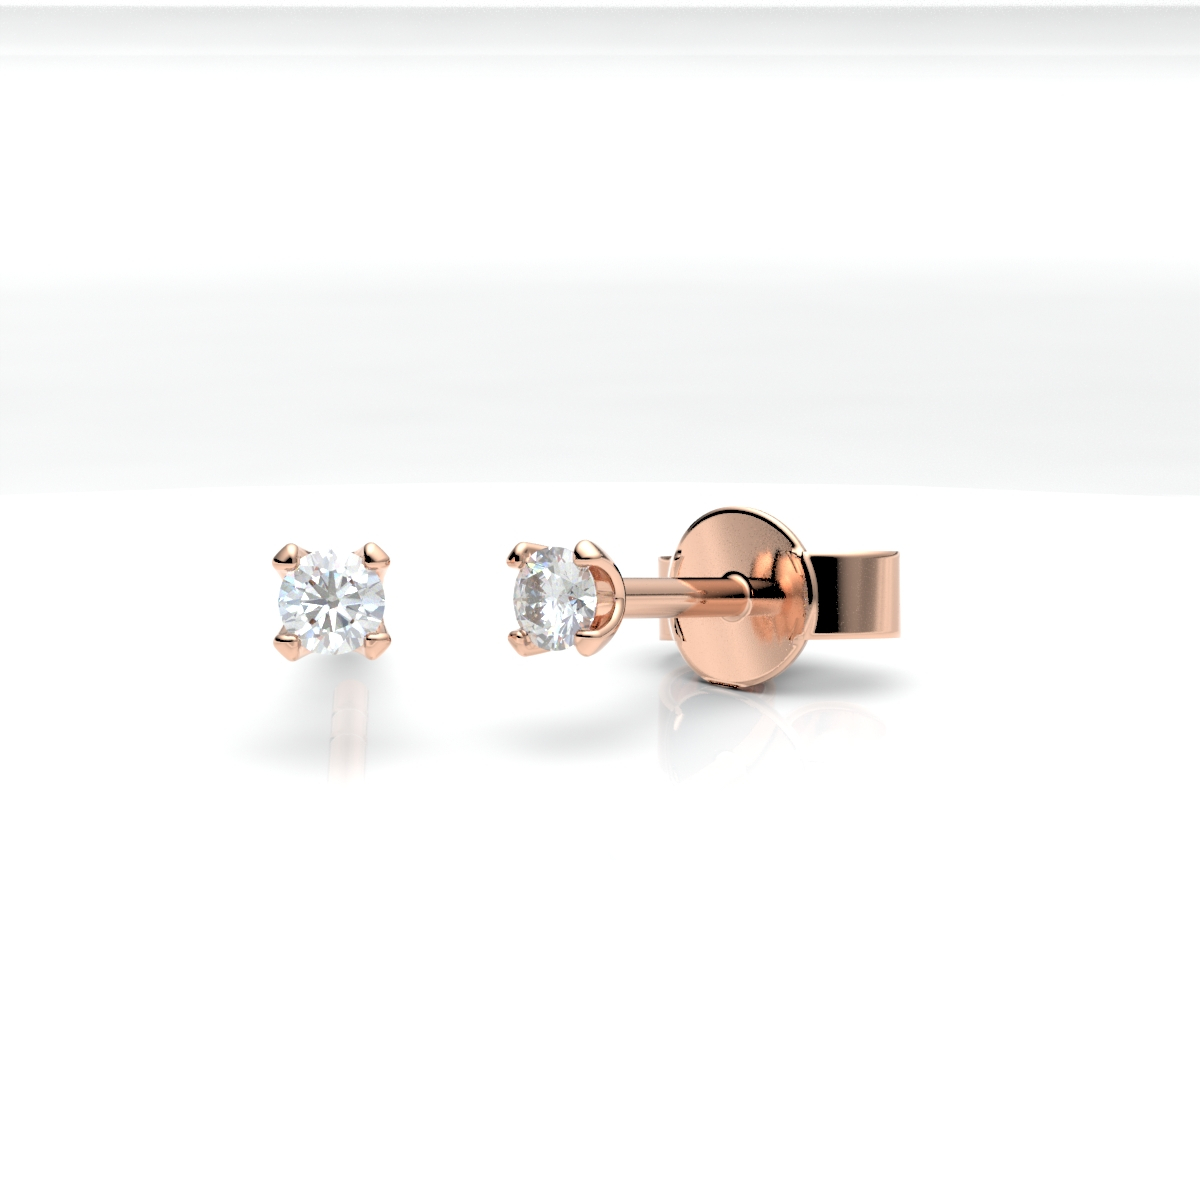 012502-5H24-001 | Ohrstecker Bergneustadt 012502 585 Roségold Brillant 0,100 ct H-SI ∅ 2.4mm100% Made in Germany  